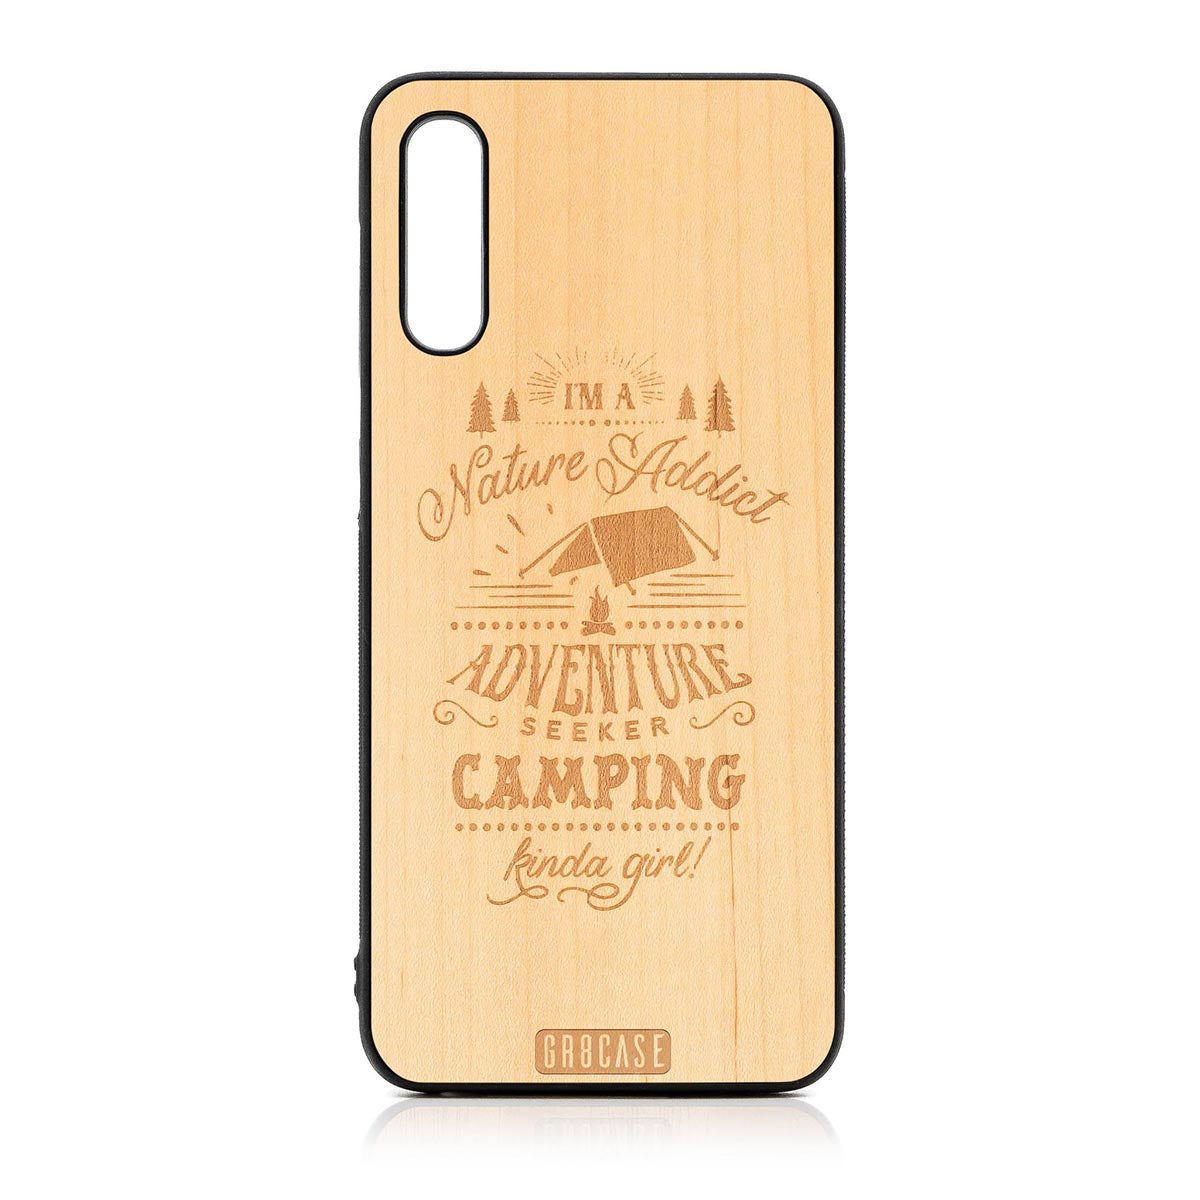 I'm A Nature Addict Adventure Seeker Camping Kinda Girl Design Wood Case For Samsung Galaxy A50 by GR8CASE